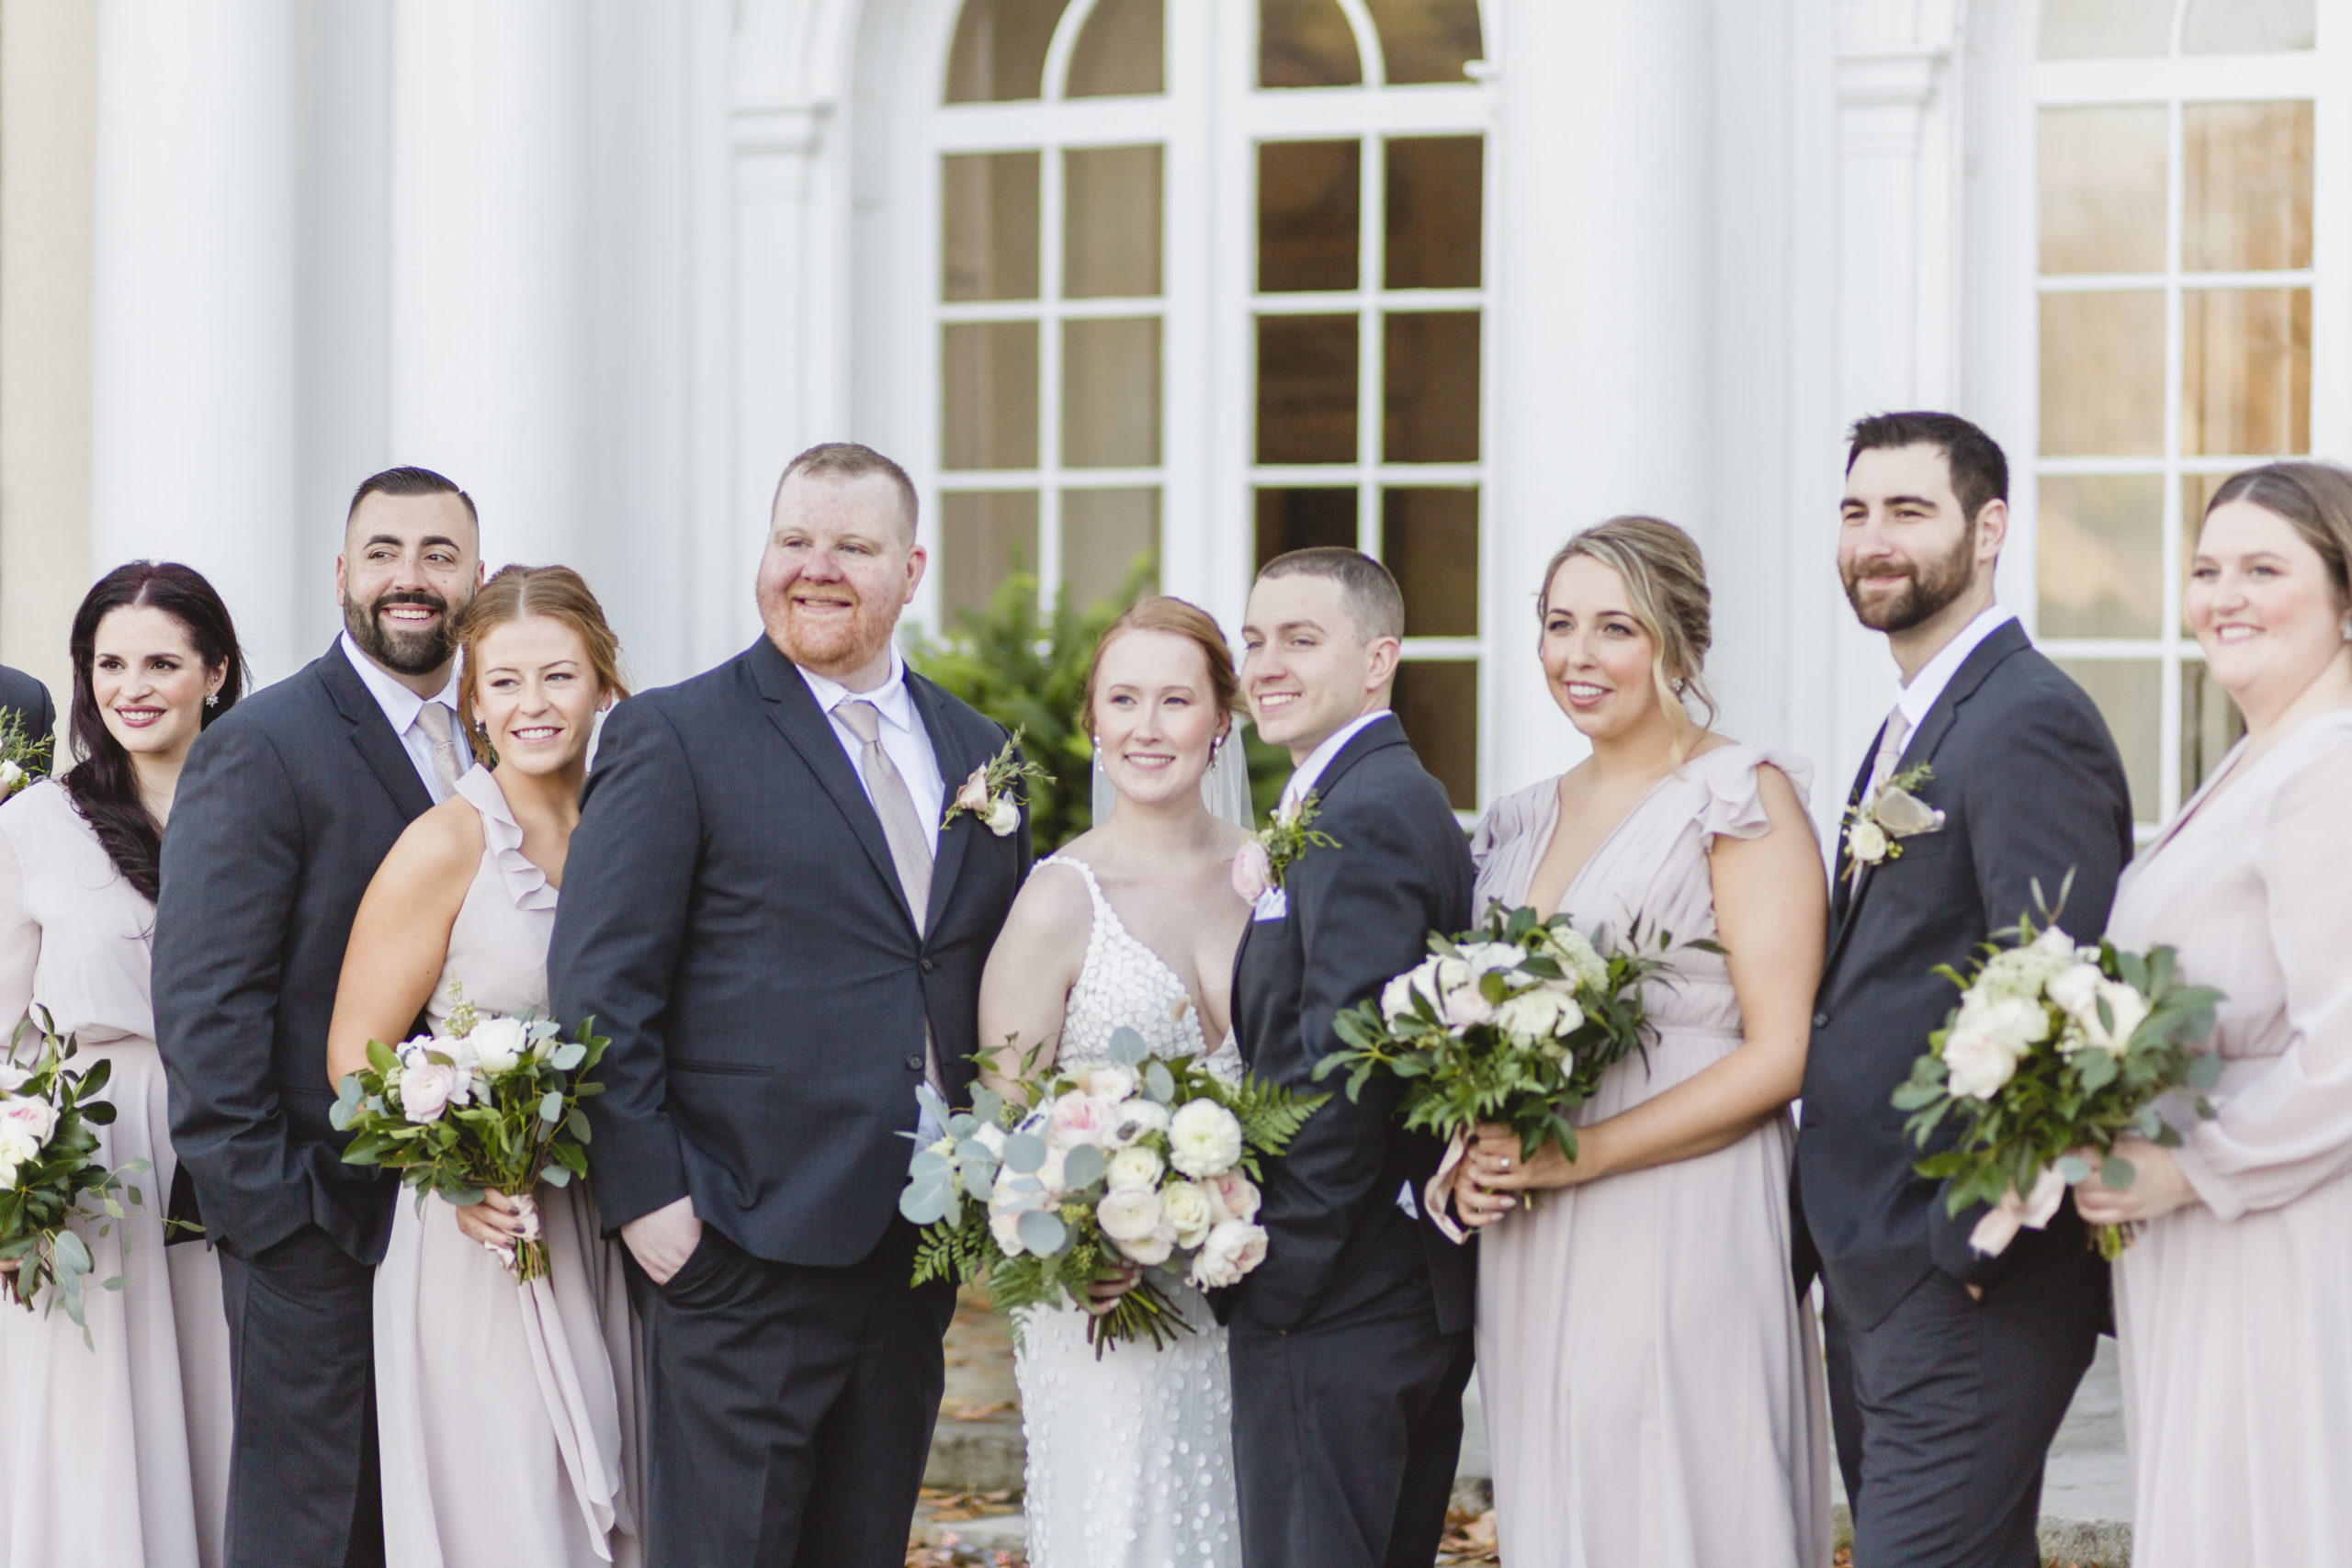 Wedding Party dressed in Mauve and black at Tupper Manor in Beverly, Massachussets.